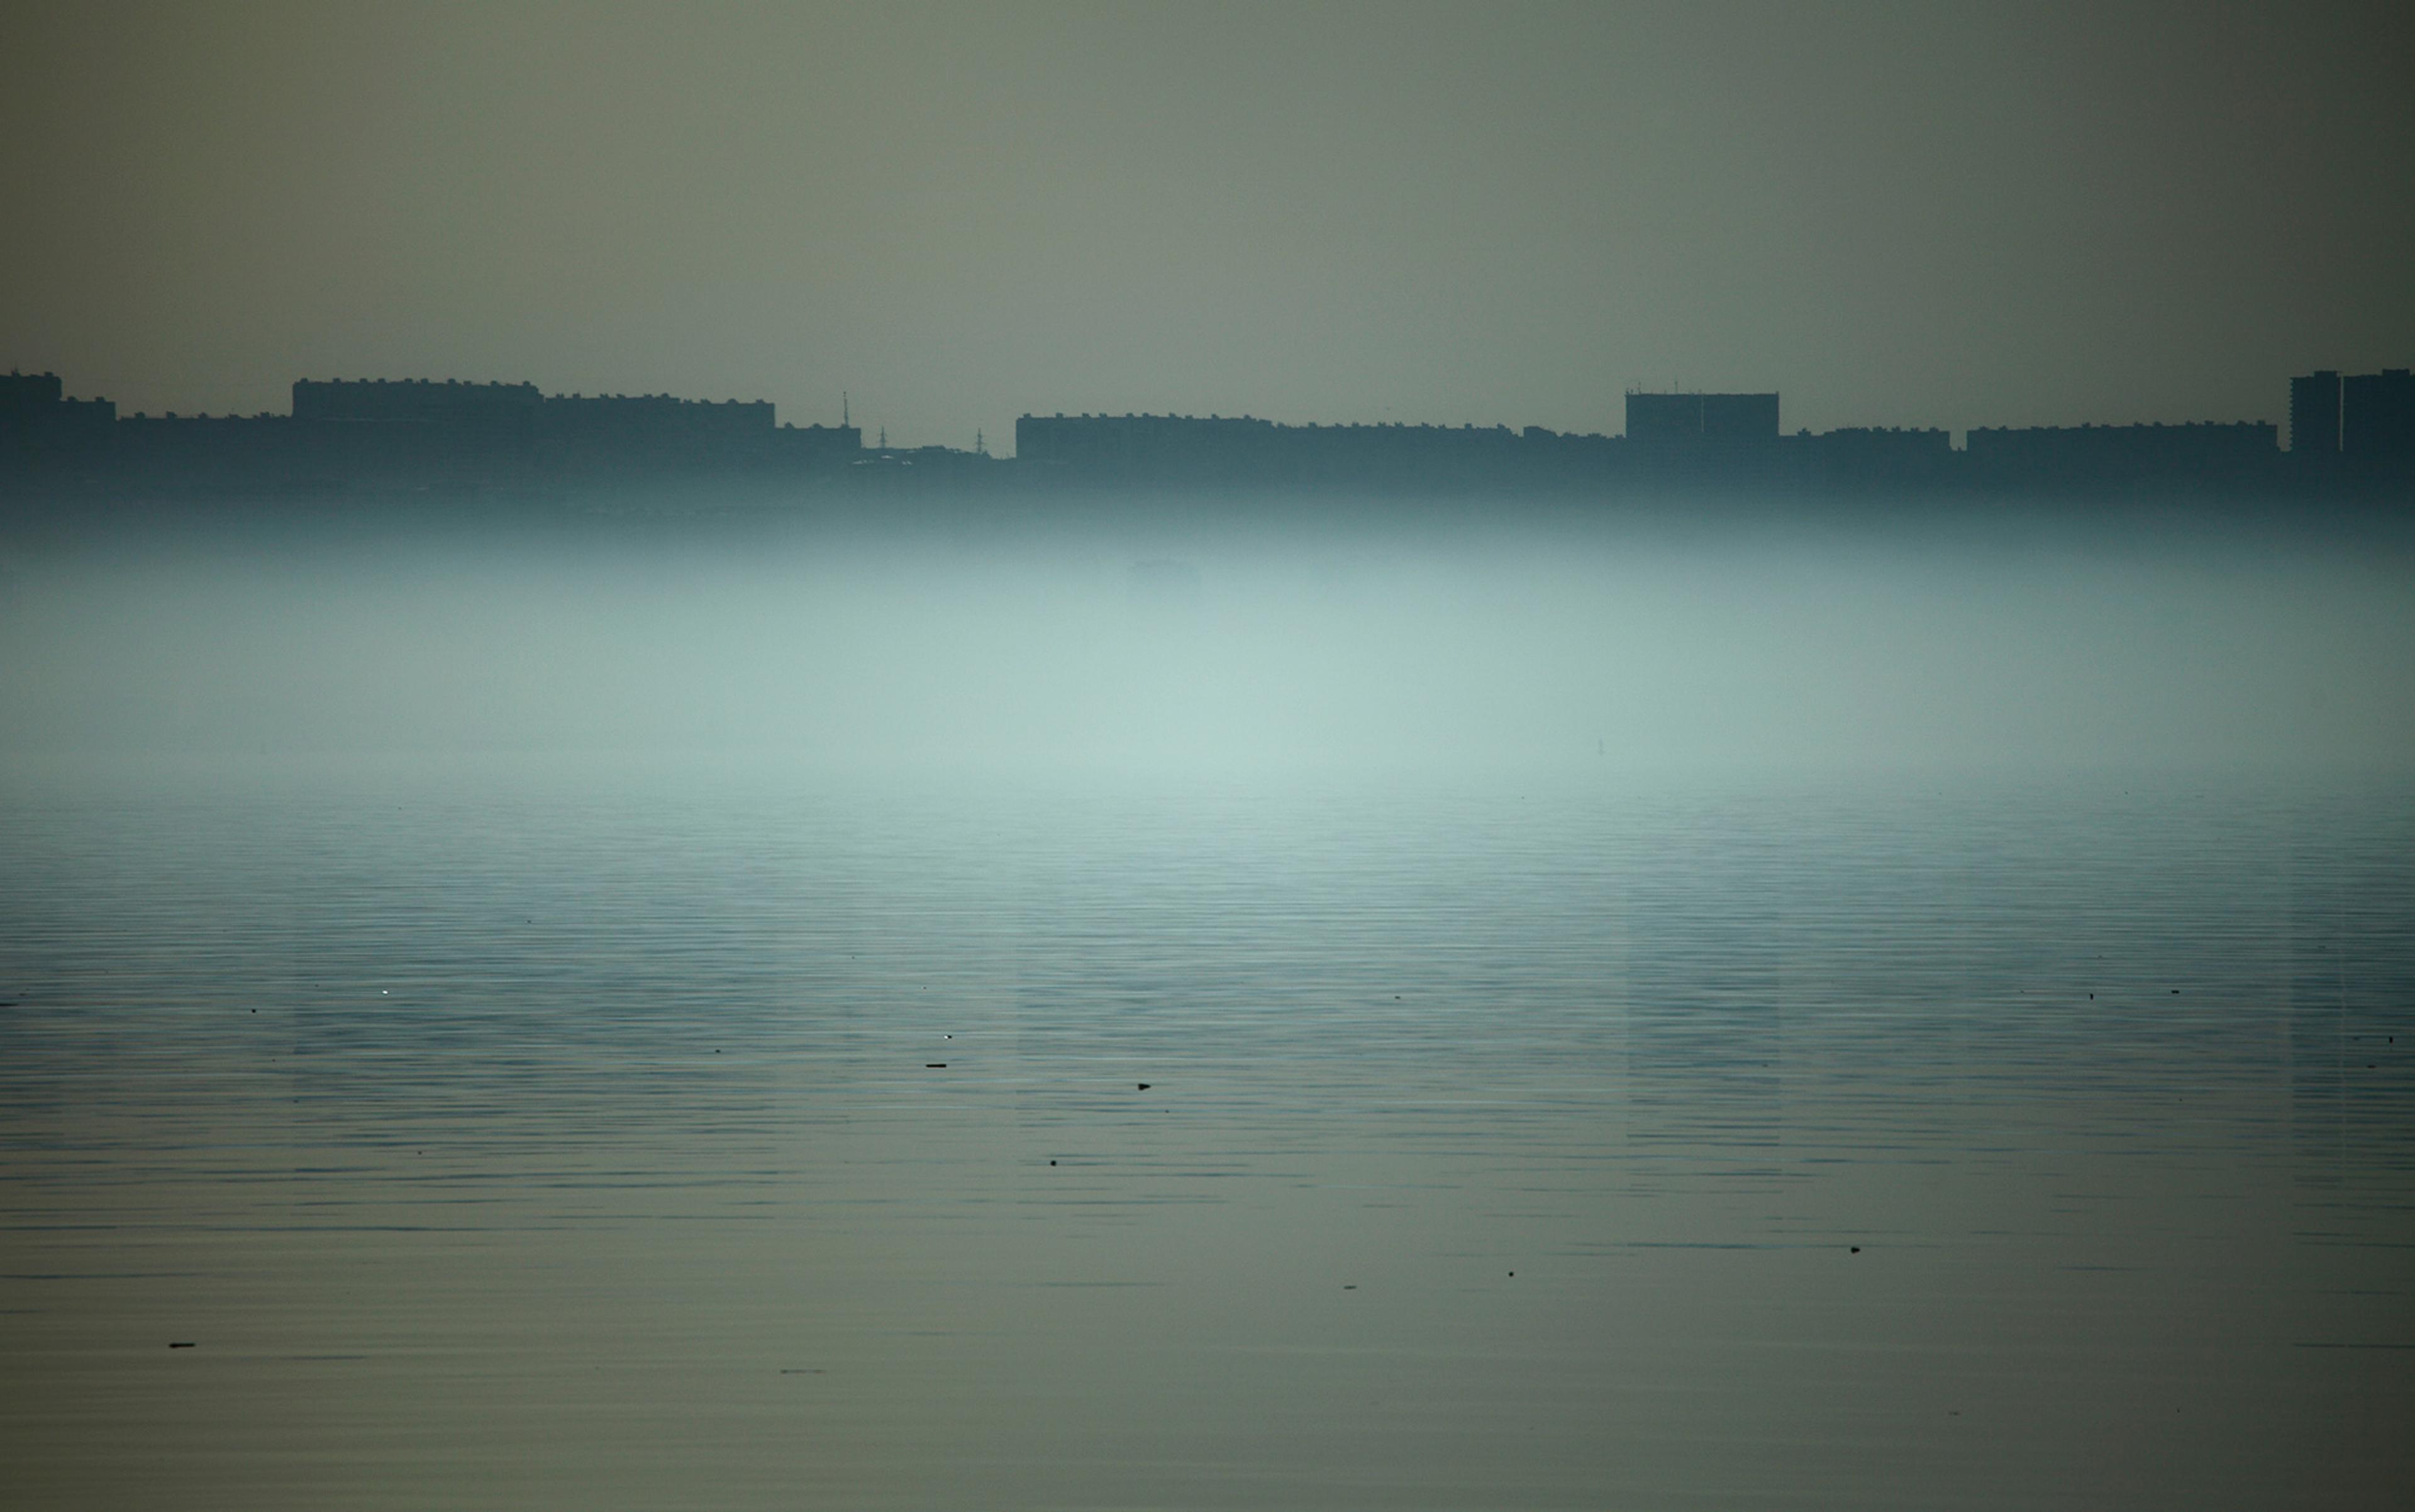 Mist-covered city skyline with a calm, reflective body of water in the foreground under a grey sky.